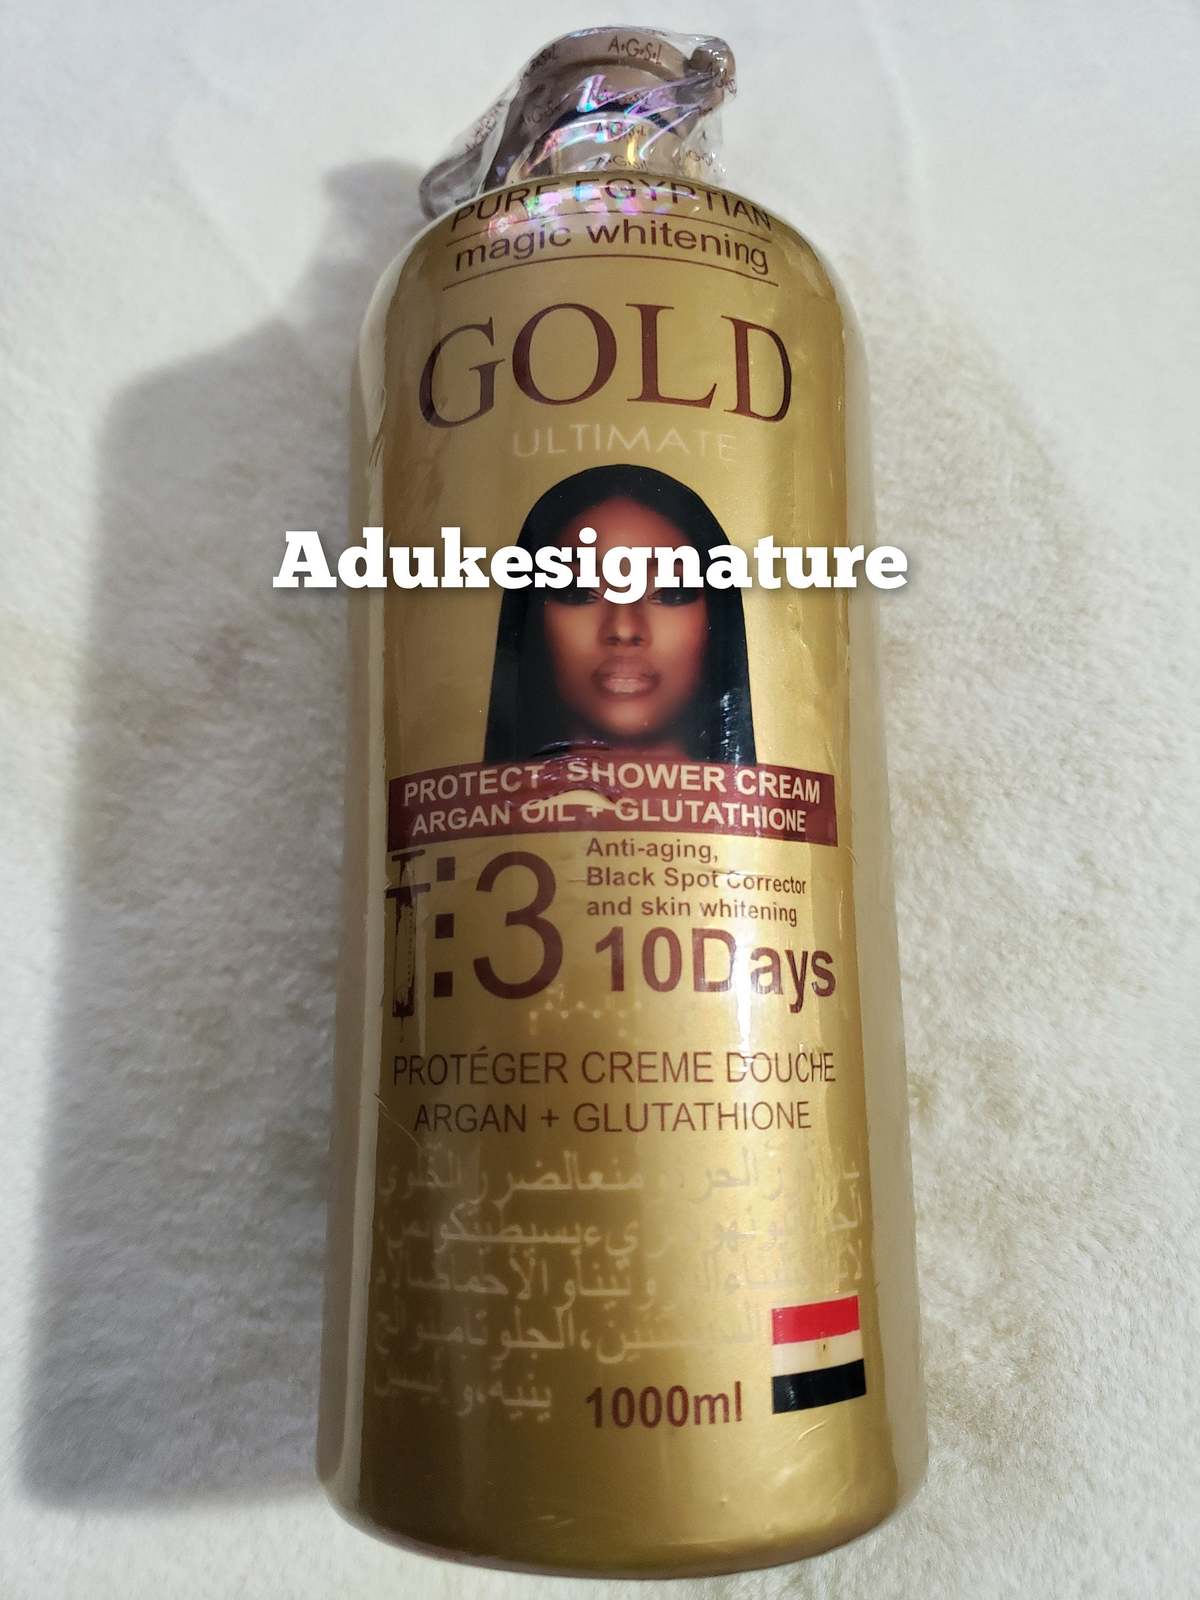 Primary image for Pure egyptian magic whitening gold injection 3 in 1 10days action shower cream